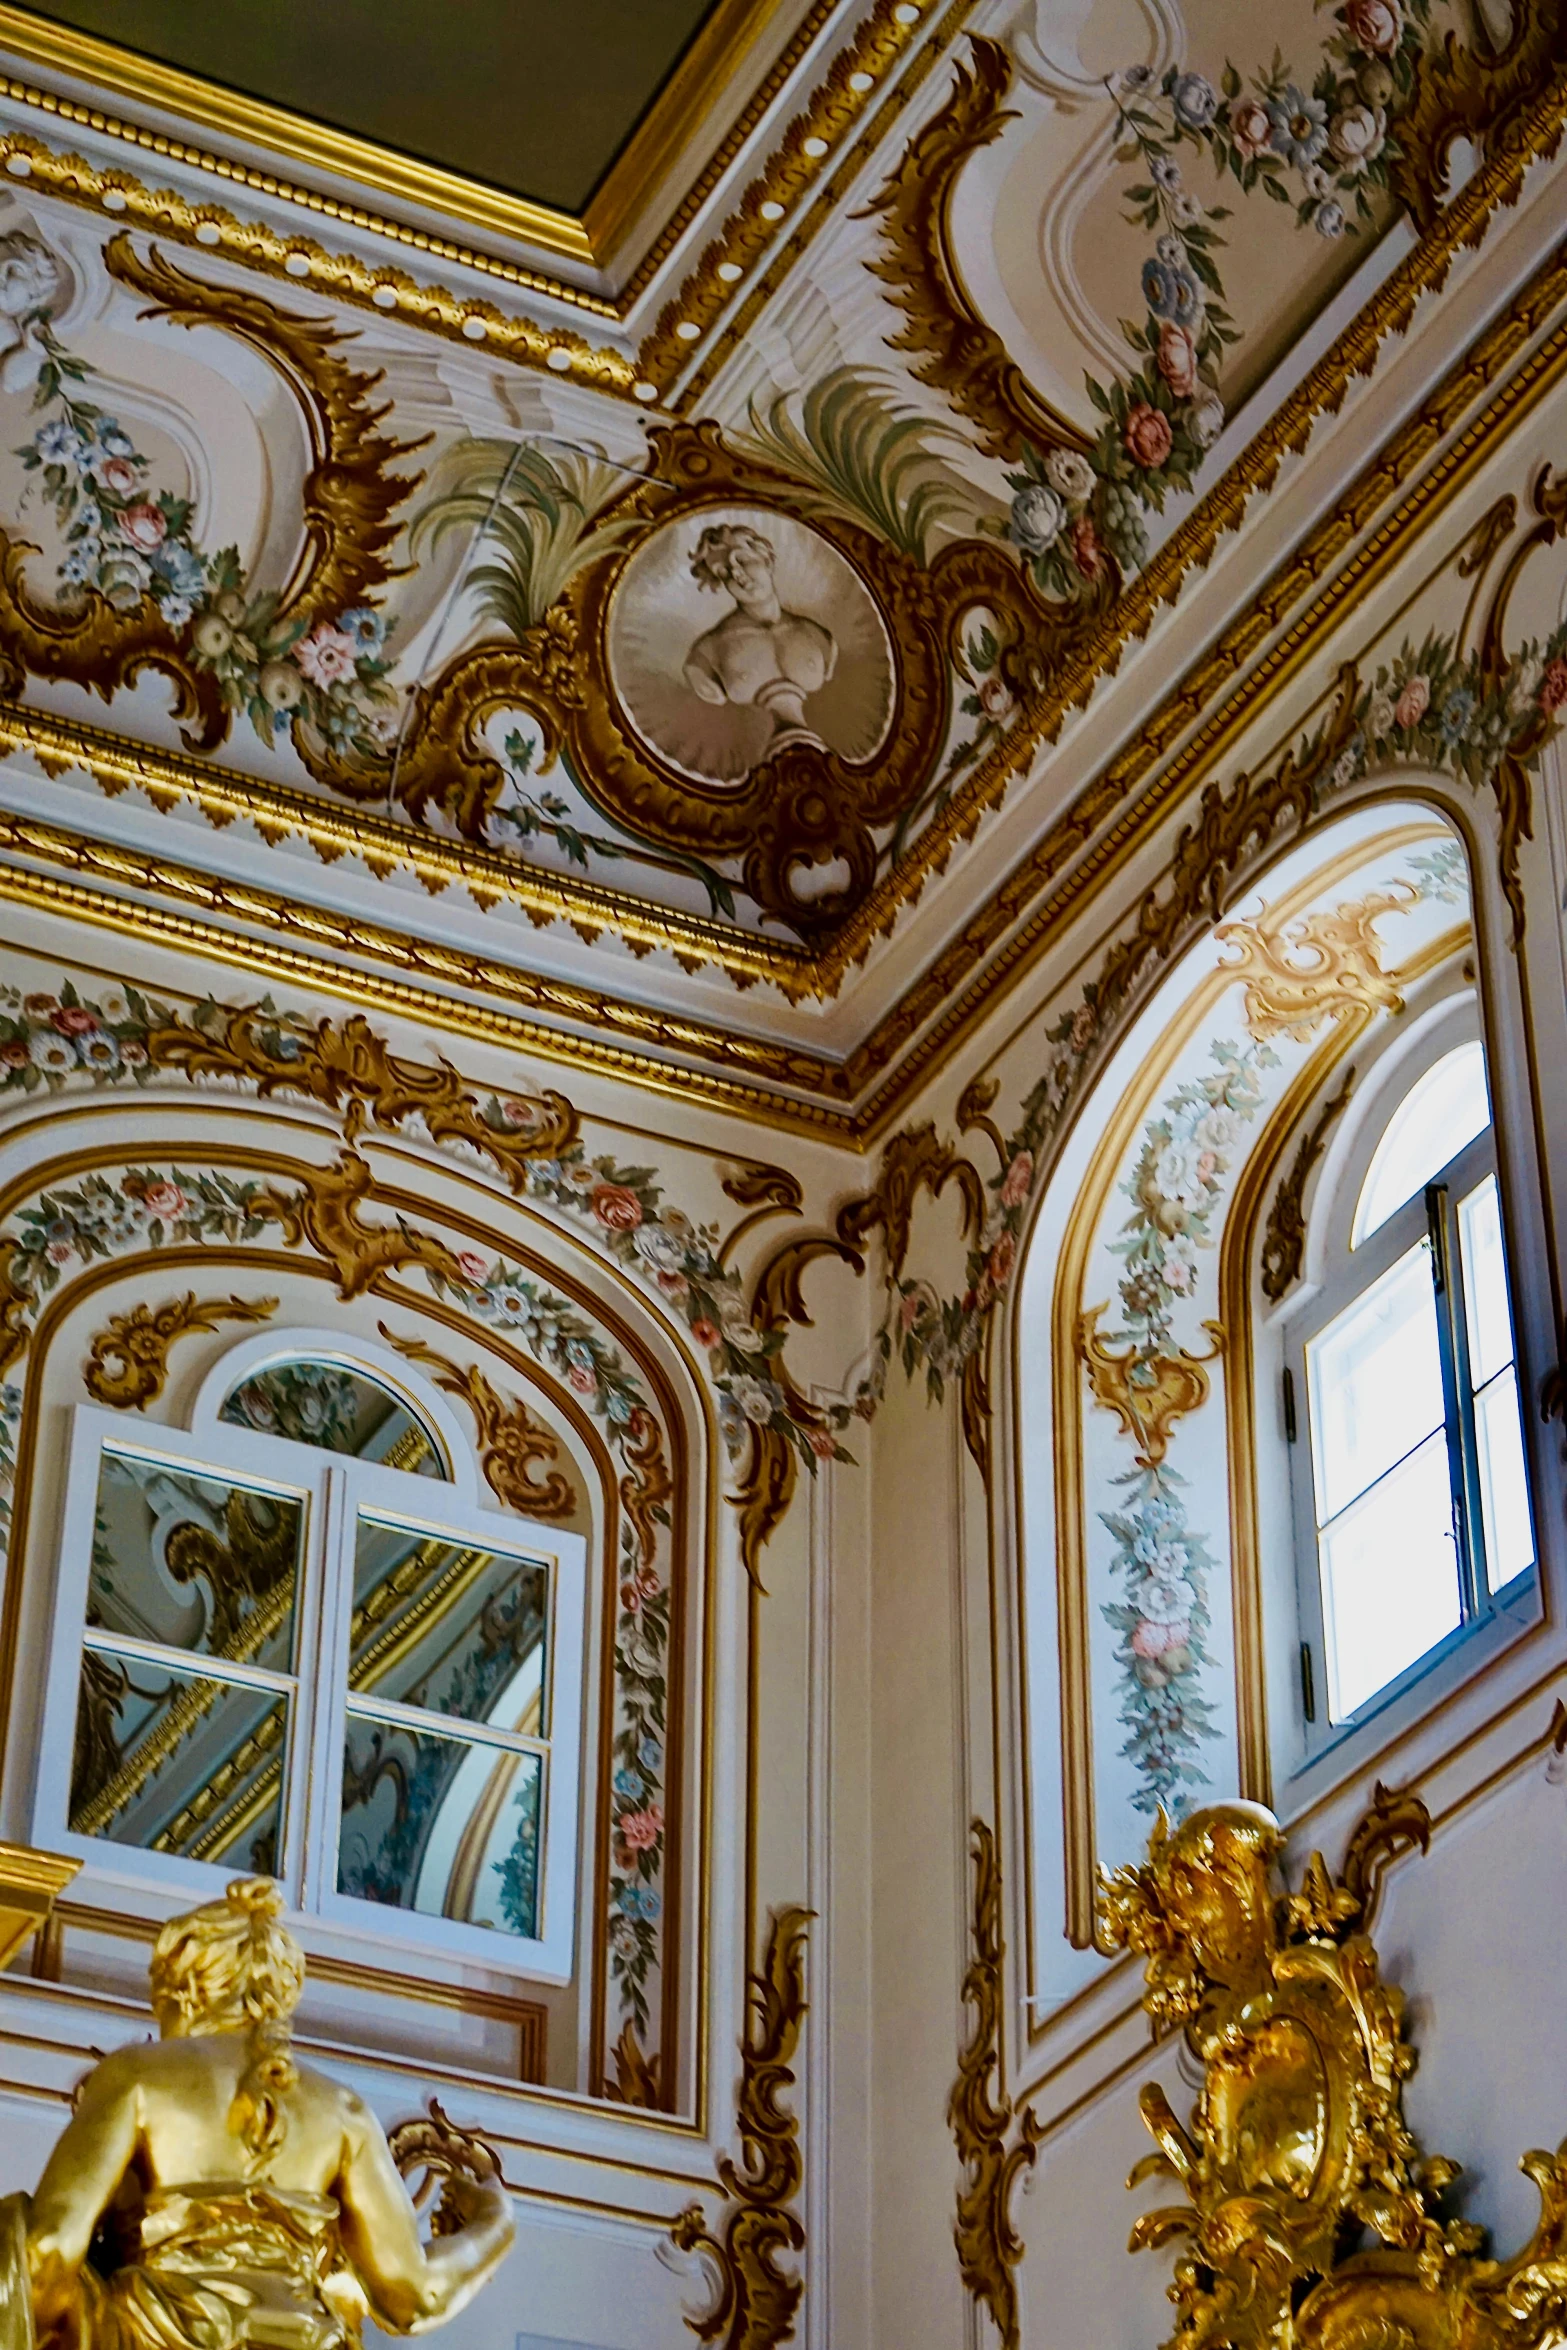 a gold clock in front of ornate painted walls